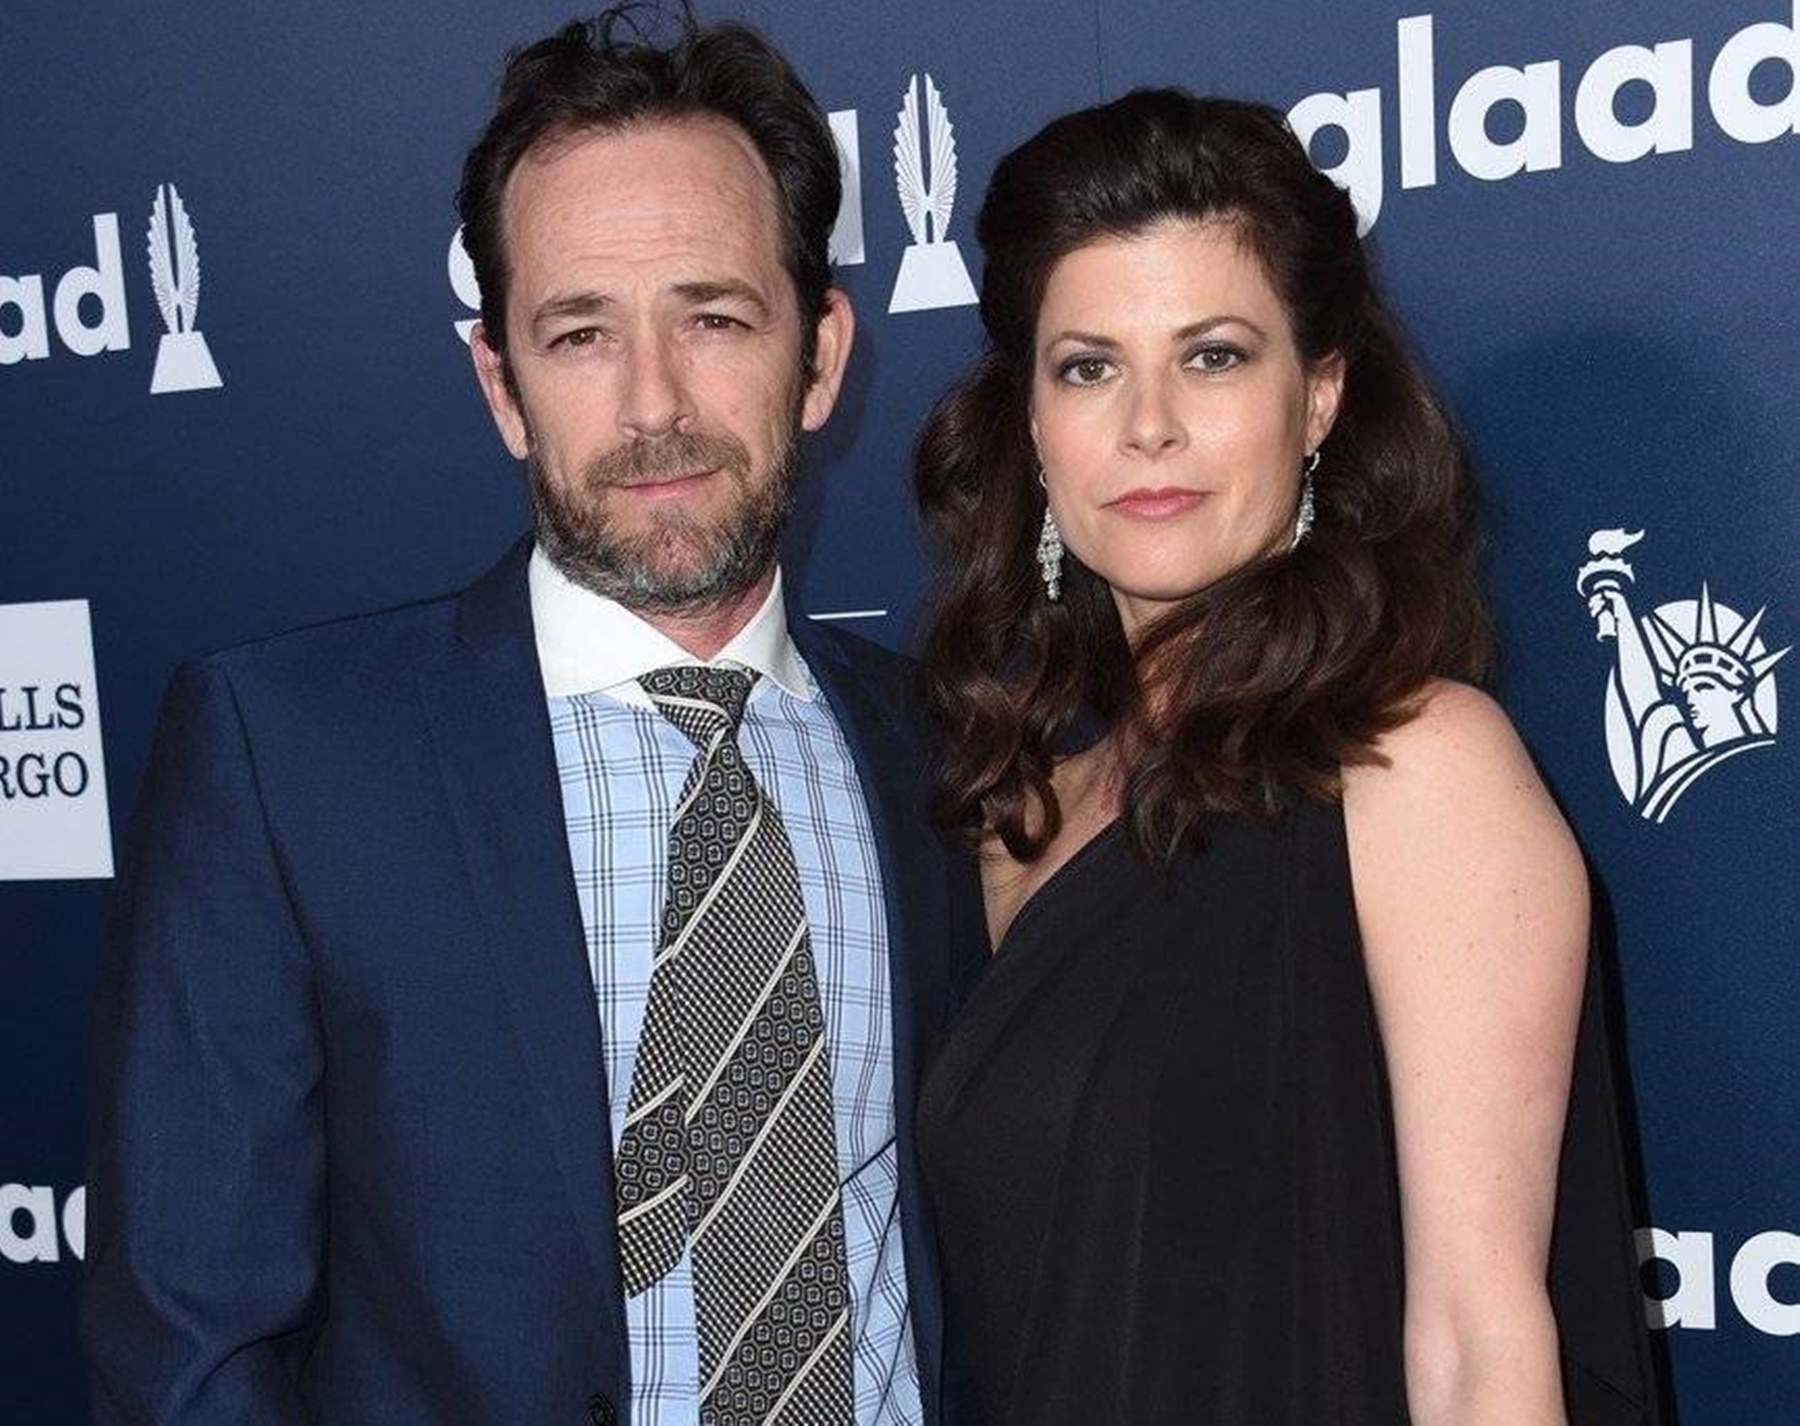 Wendy Madison Bauer (Wife of Luke Perry) Wiki, Biography, Age, Height, Weight, Husband, Family, Net Worth, Facts